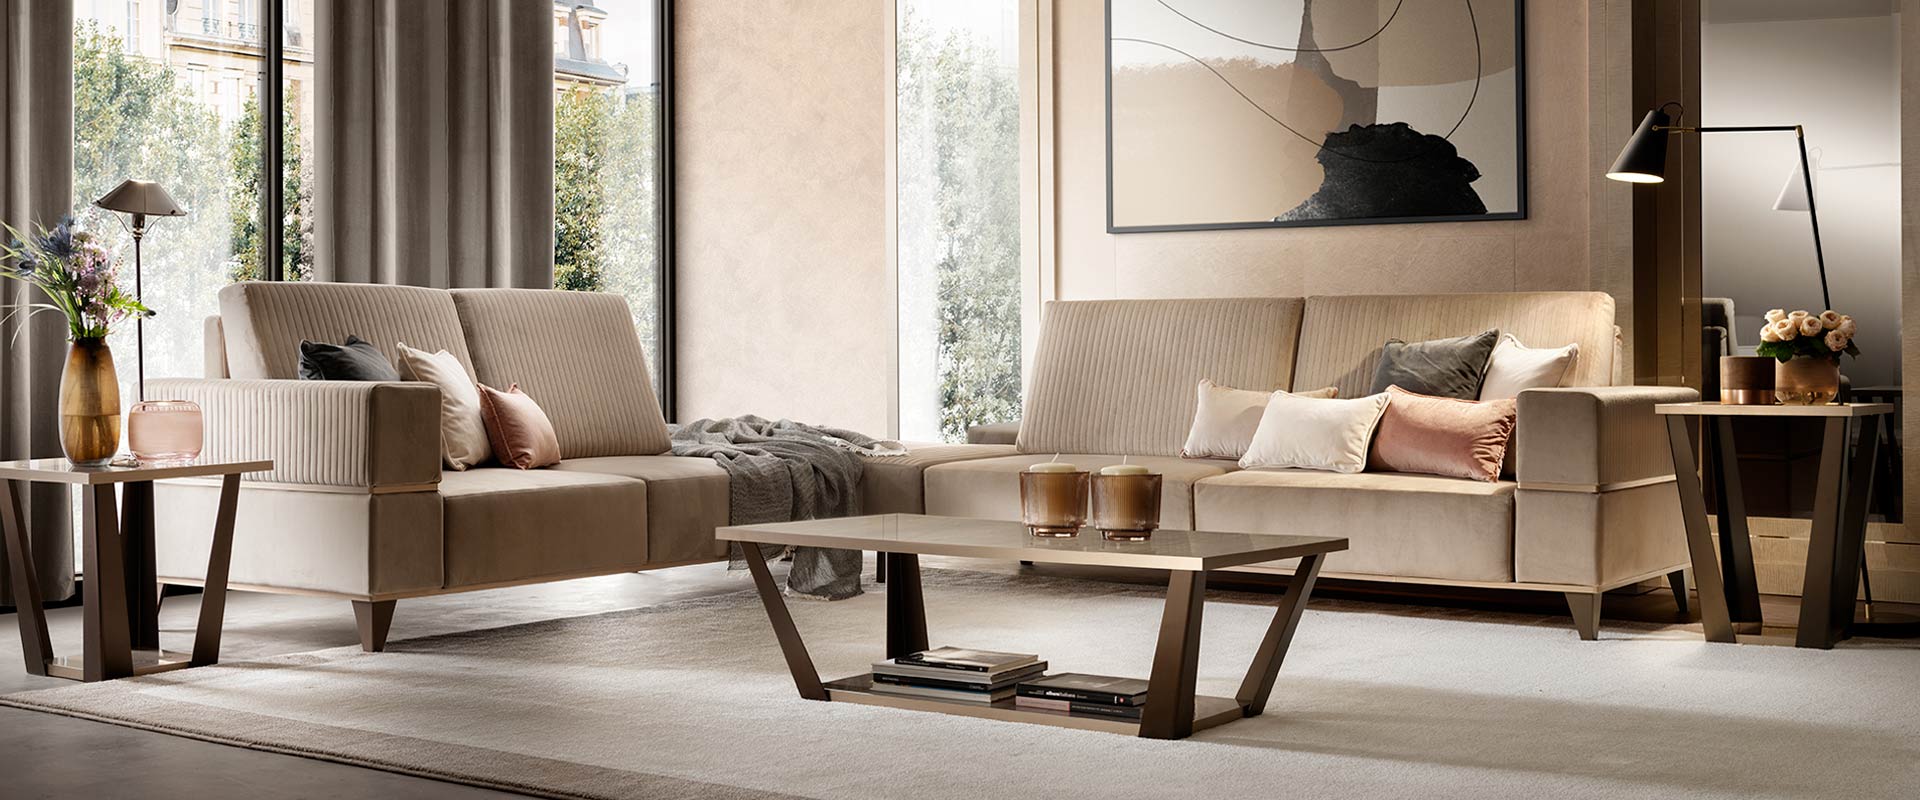 adora interiors ambra living room corner sofa with pouf and coffee tables and lamptables